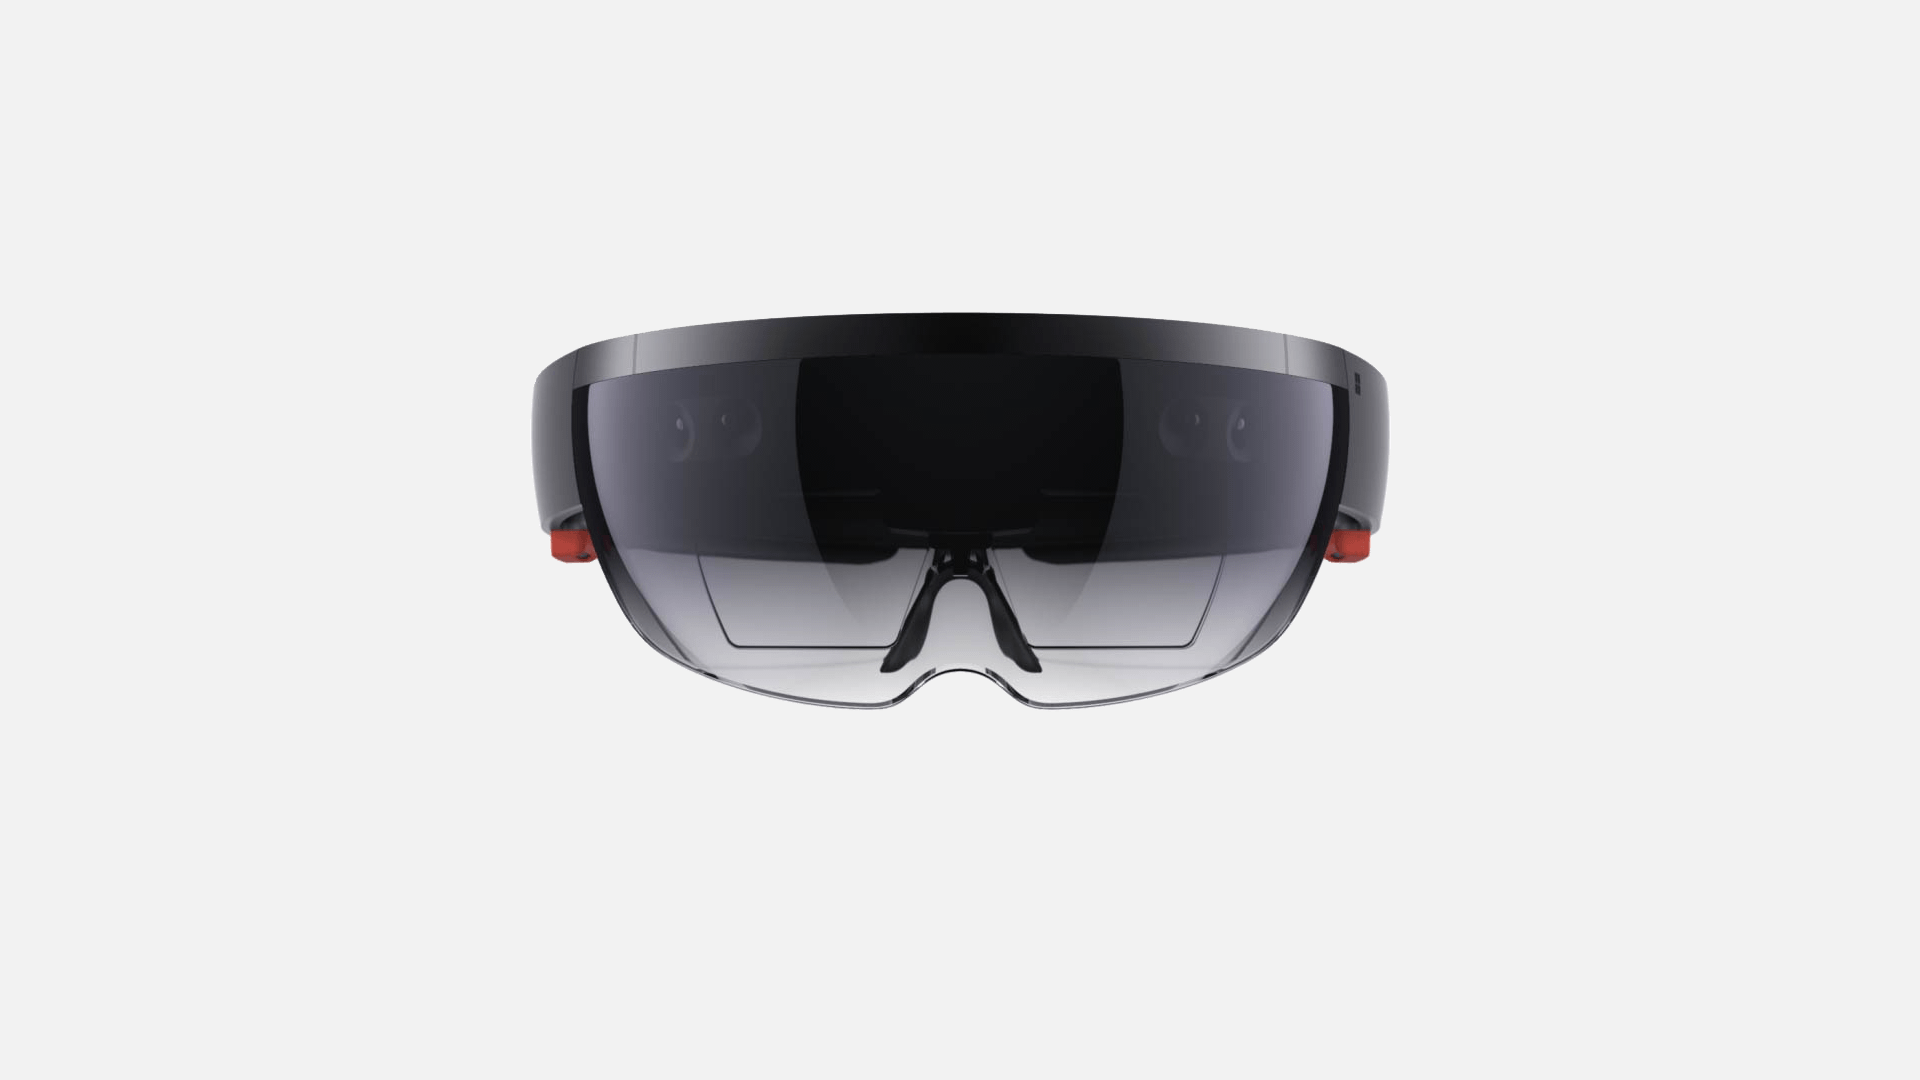 Augmented Reality Headset